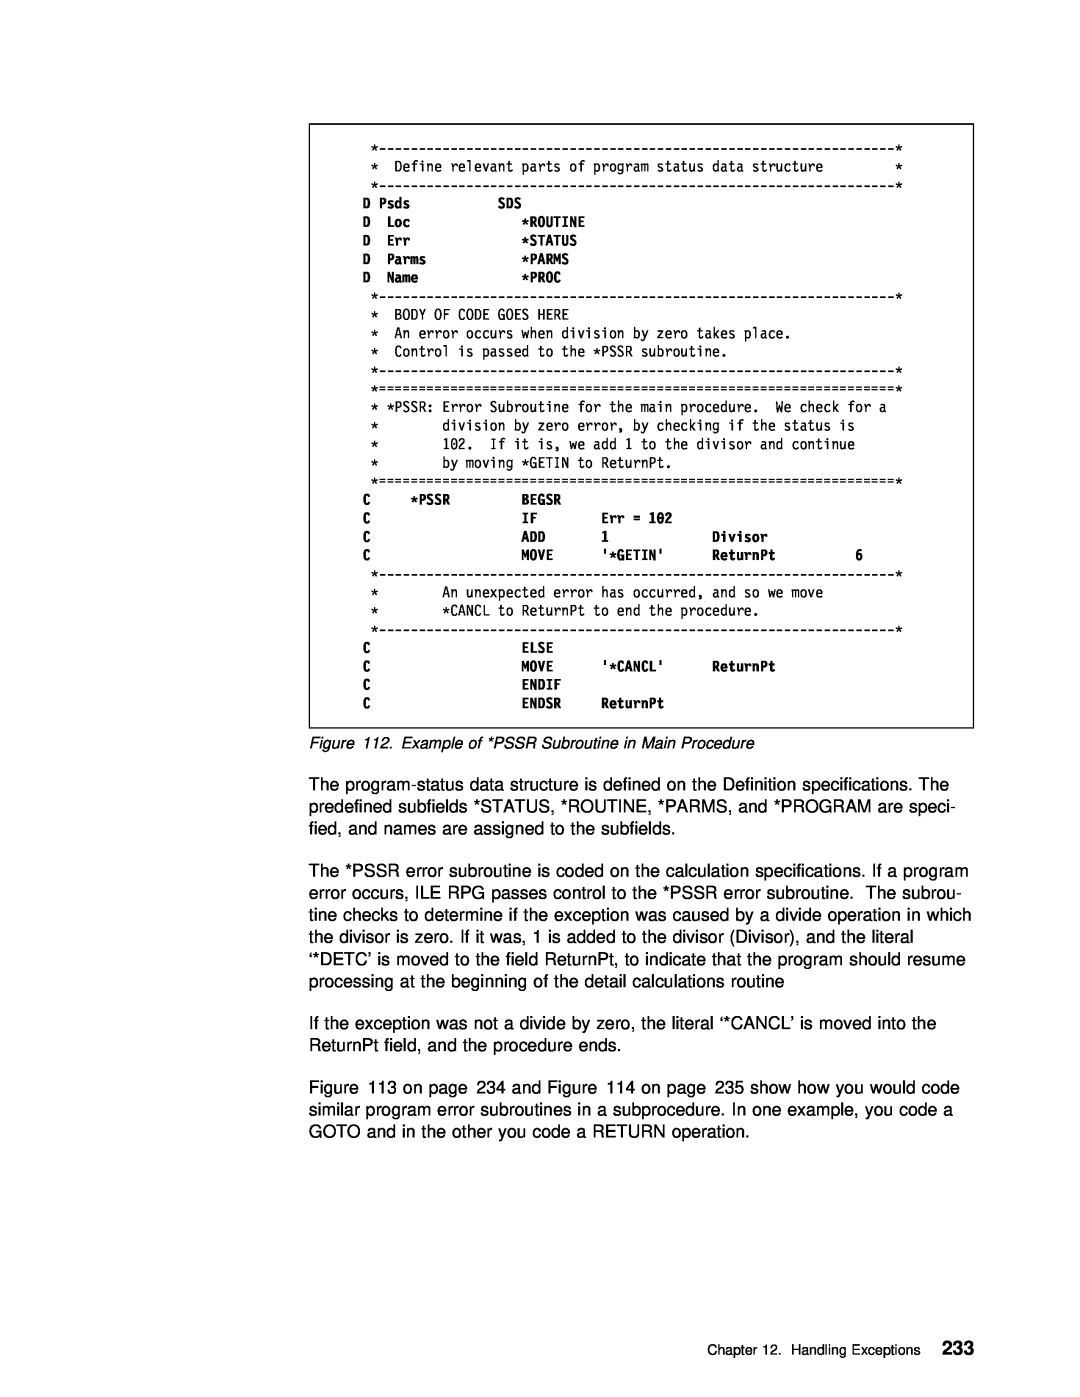 IBM AS/400 manual Example of *PSSR Subroutine in Main Procedure, ‘*Detc’, Handling Exceptions233 